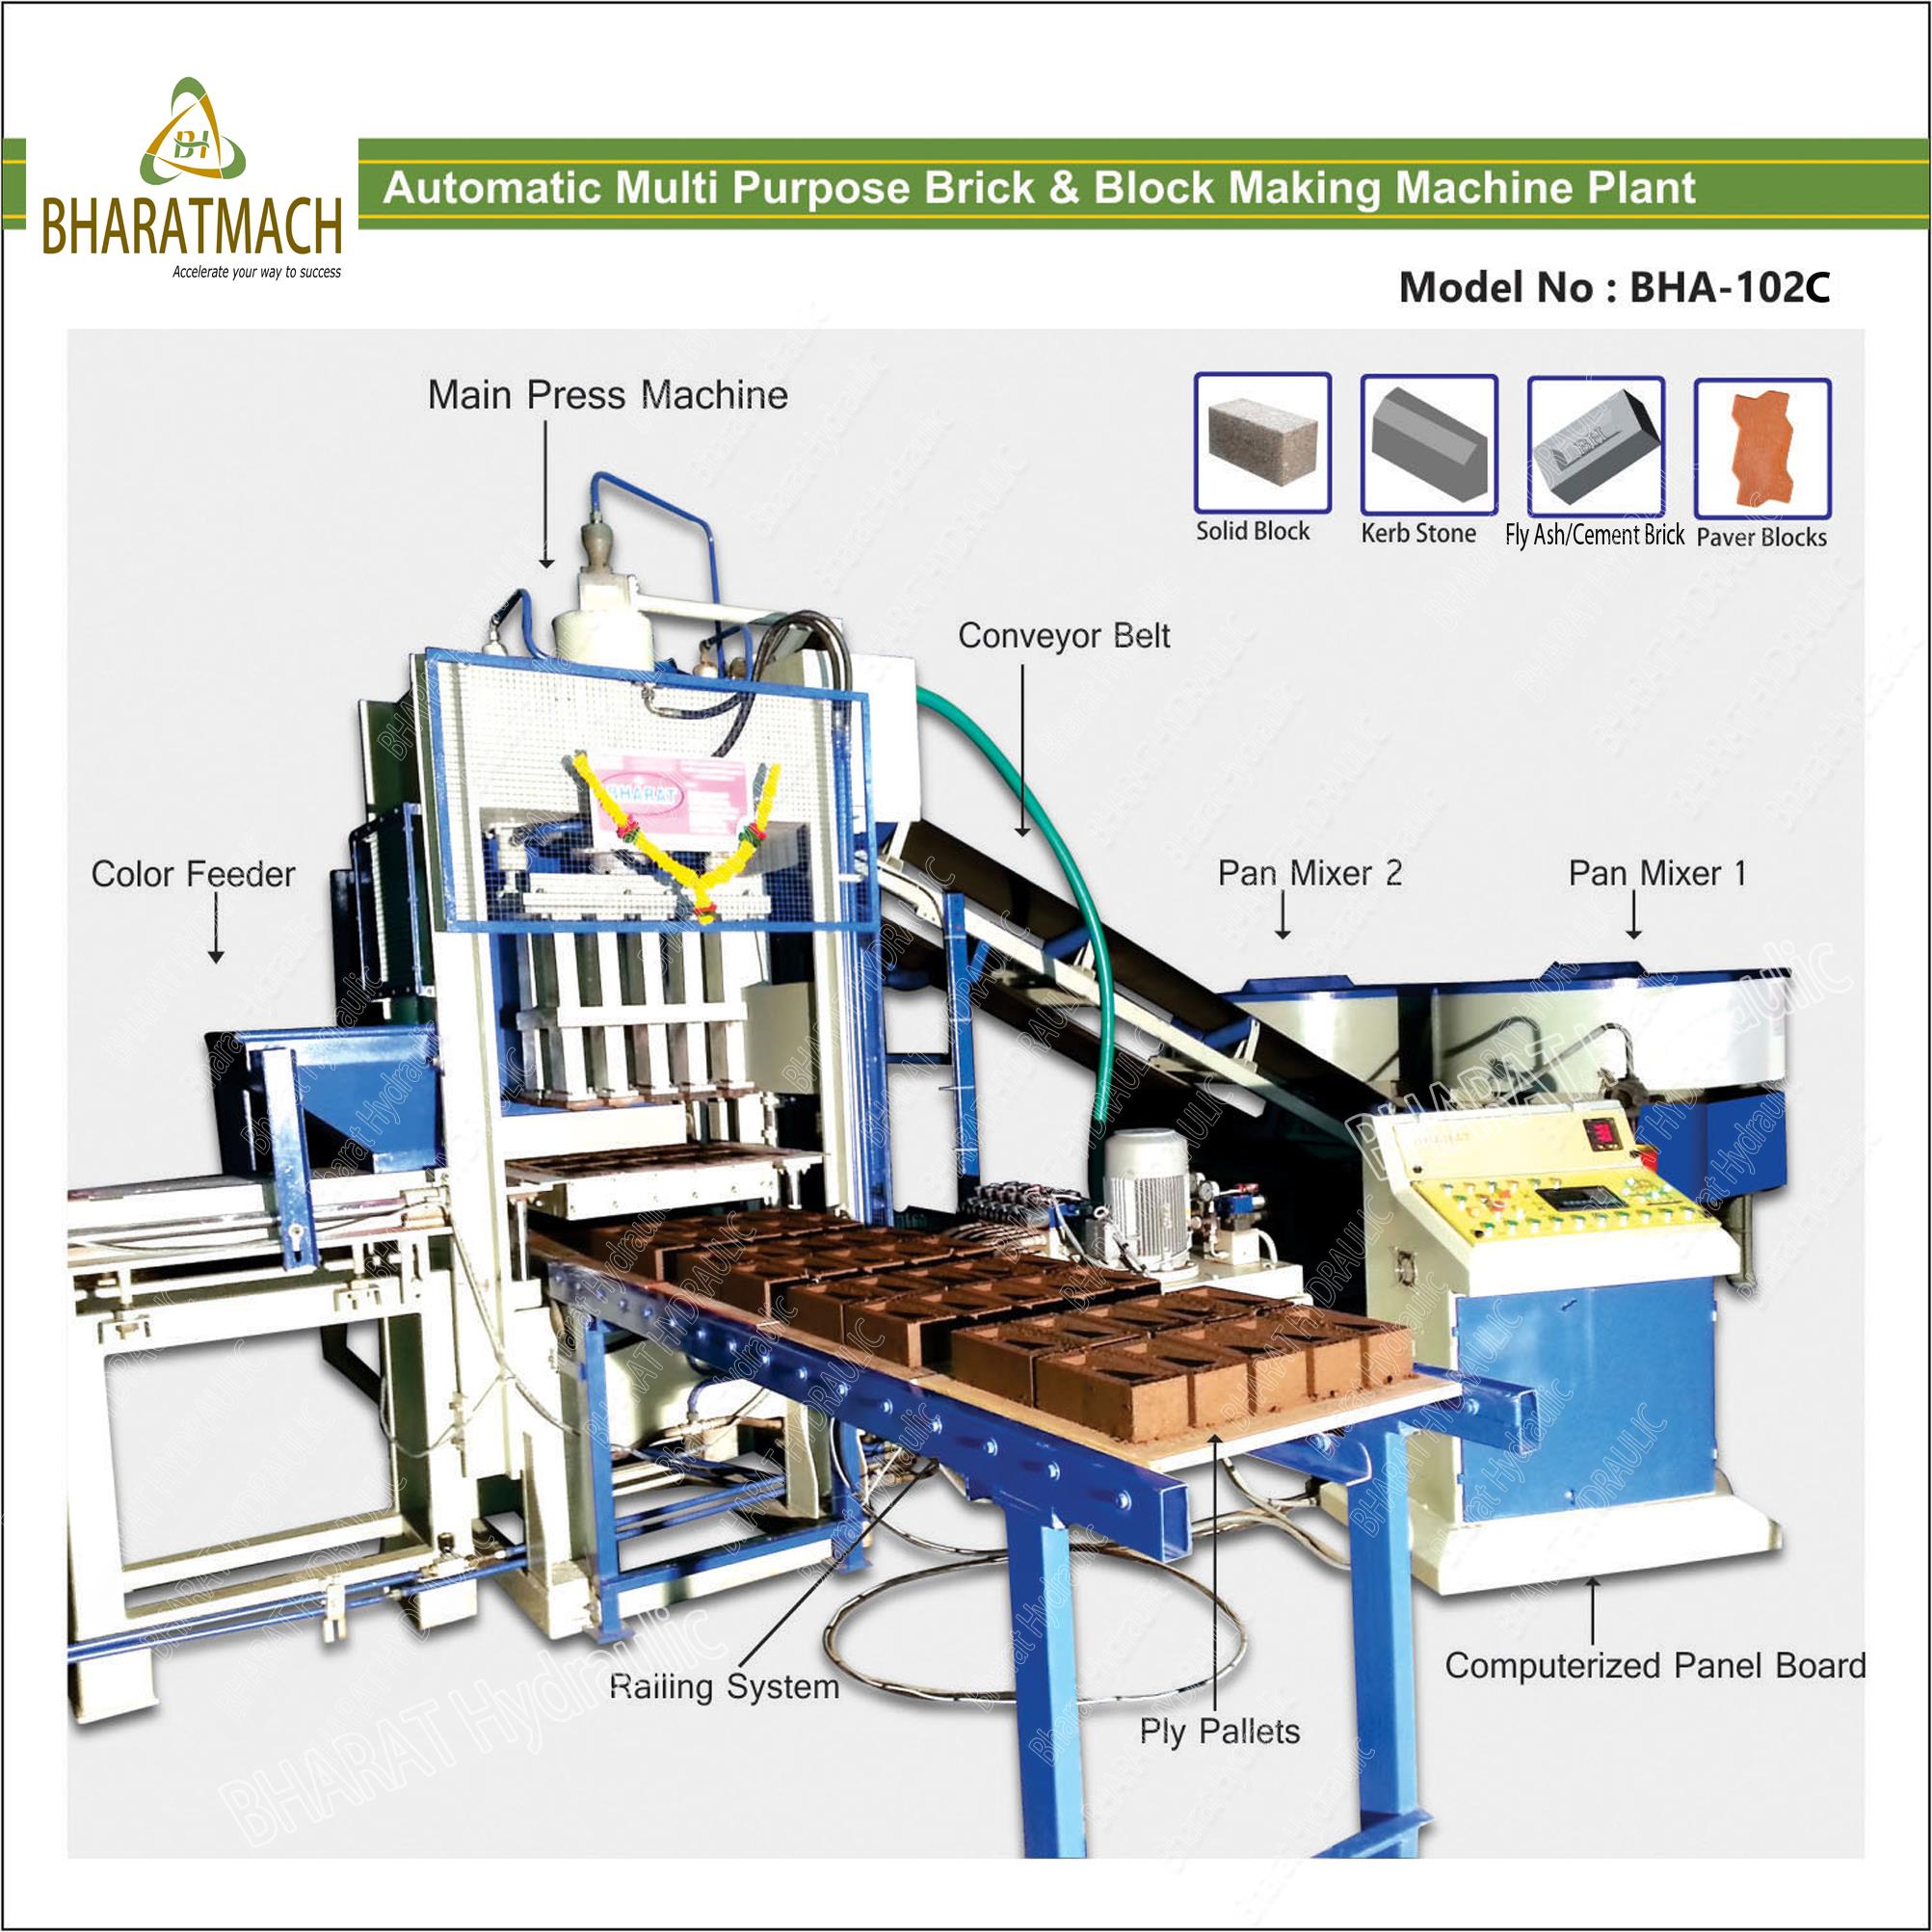 Buy Block Making Machine at Best Price - Find Manufacturers & Sellers in India